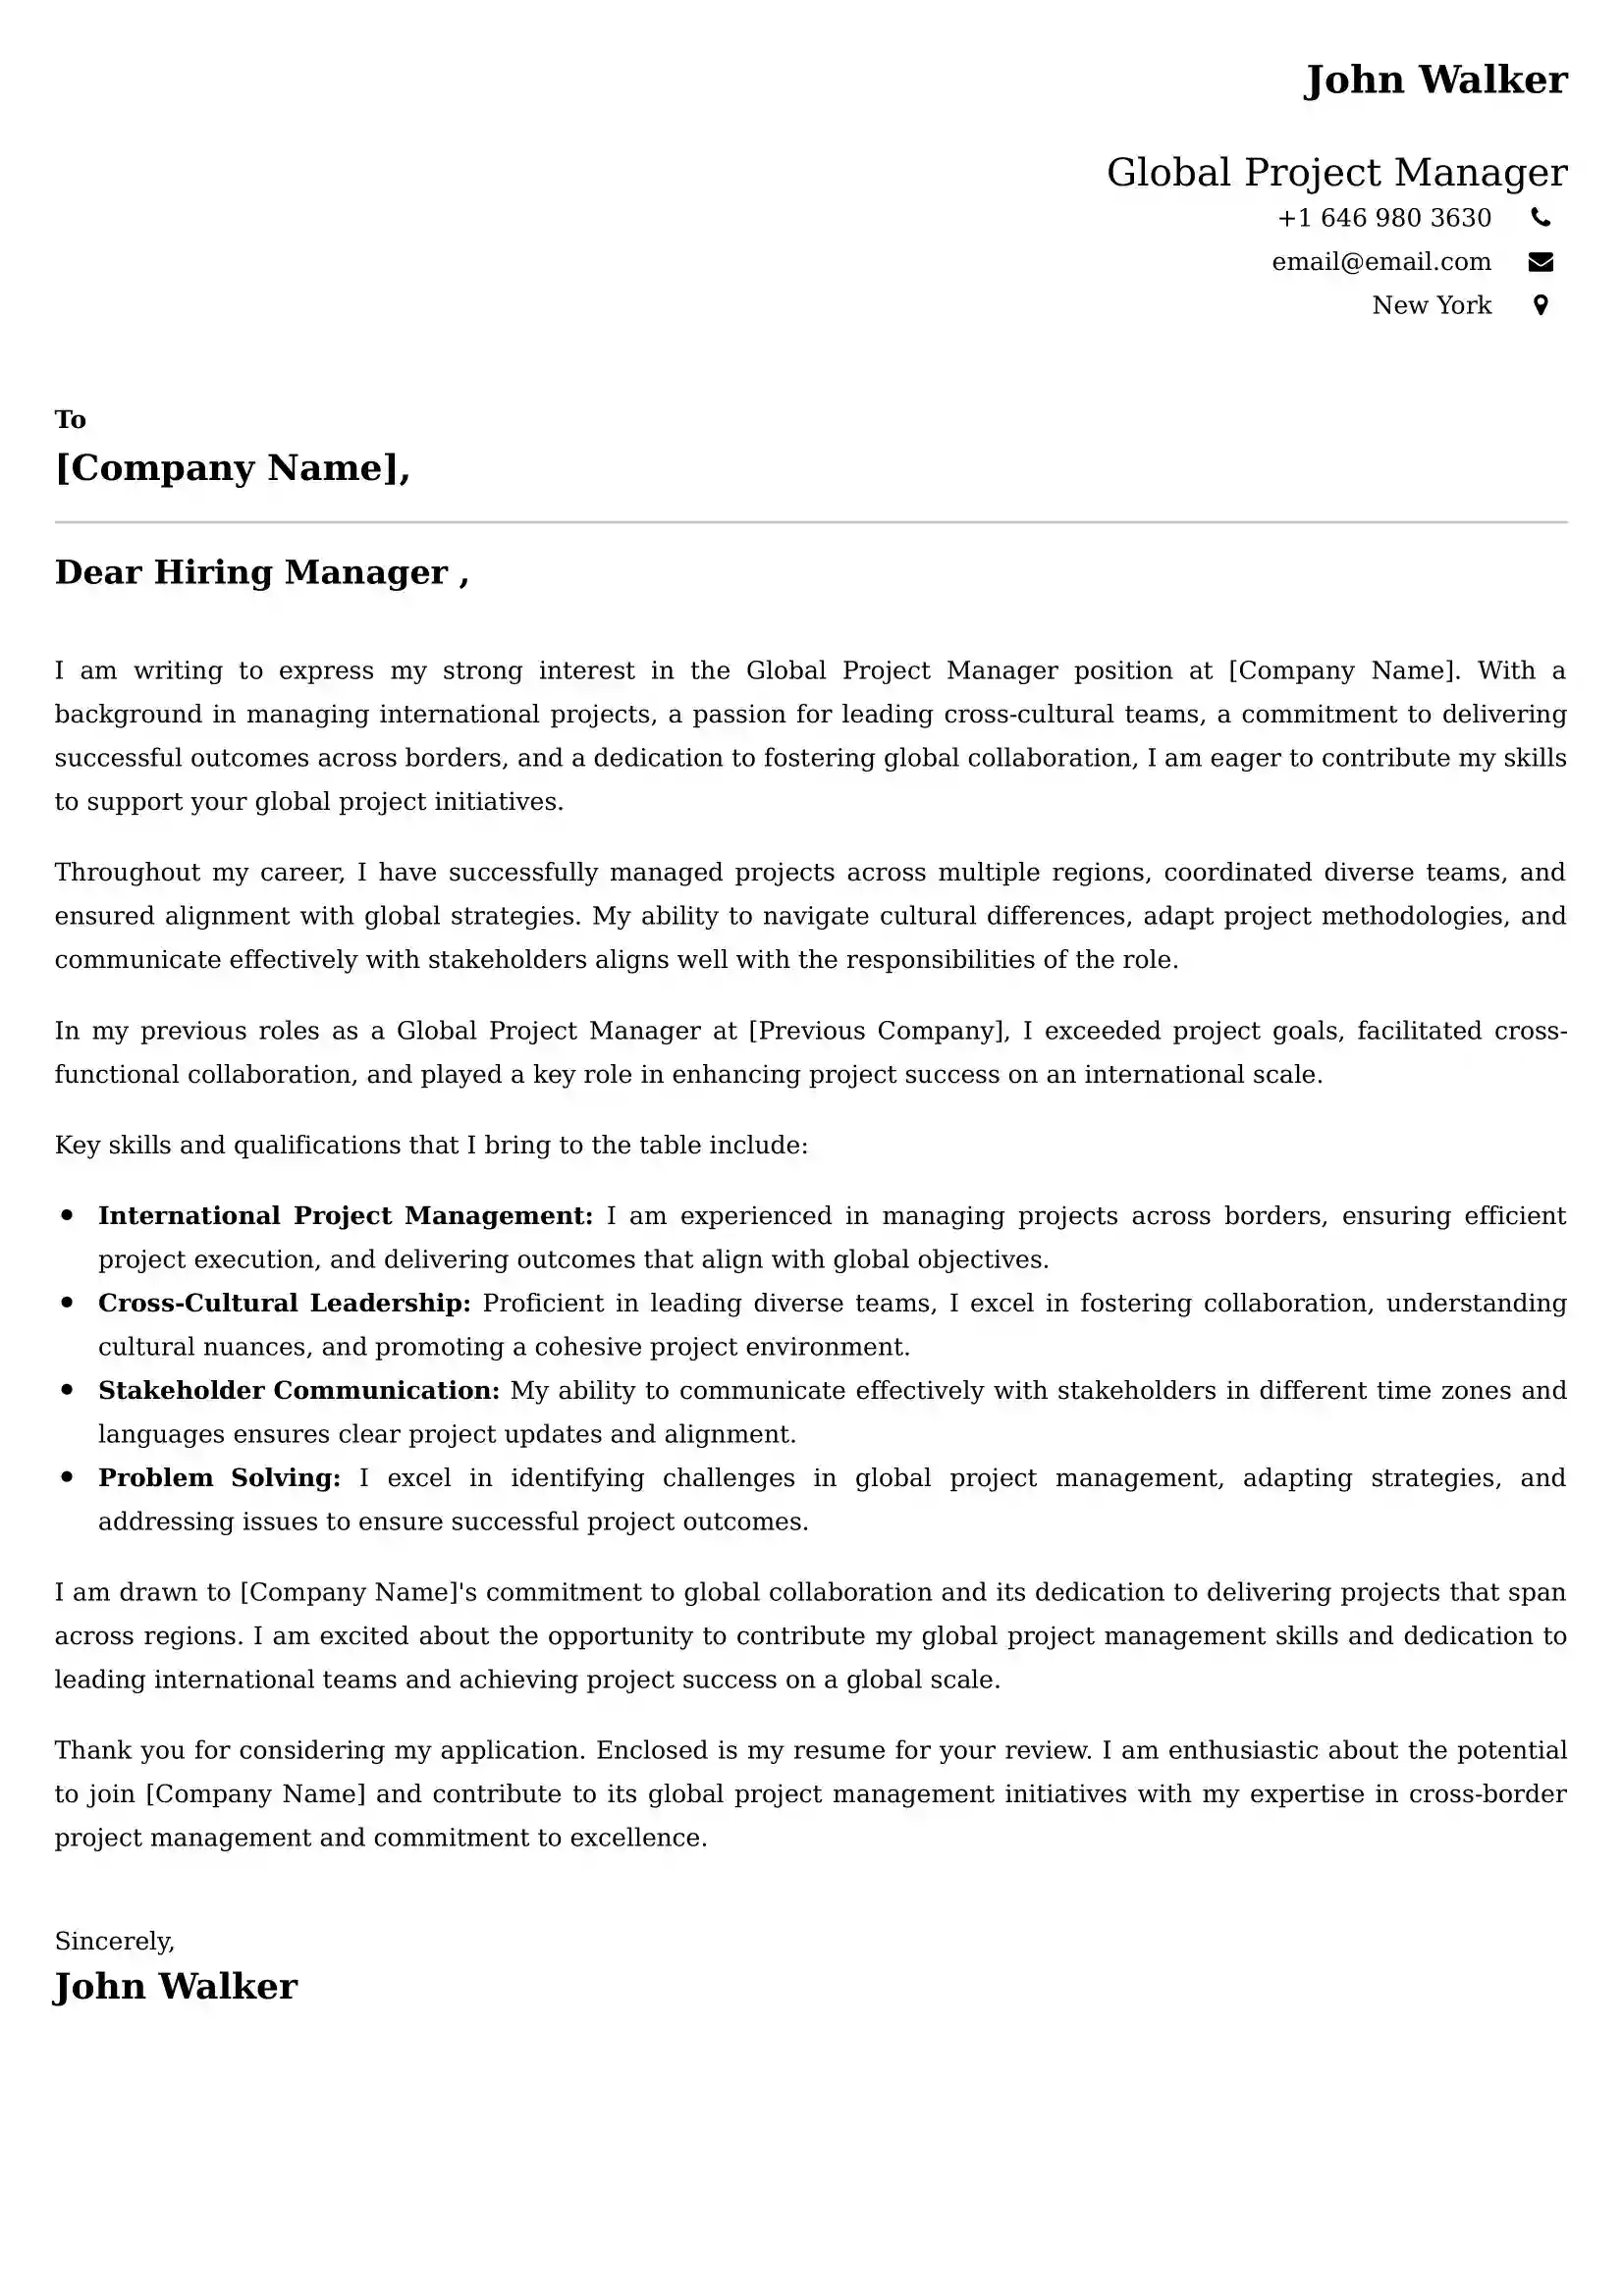 Global Project Manager Cover Letter Examples for UK 